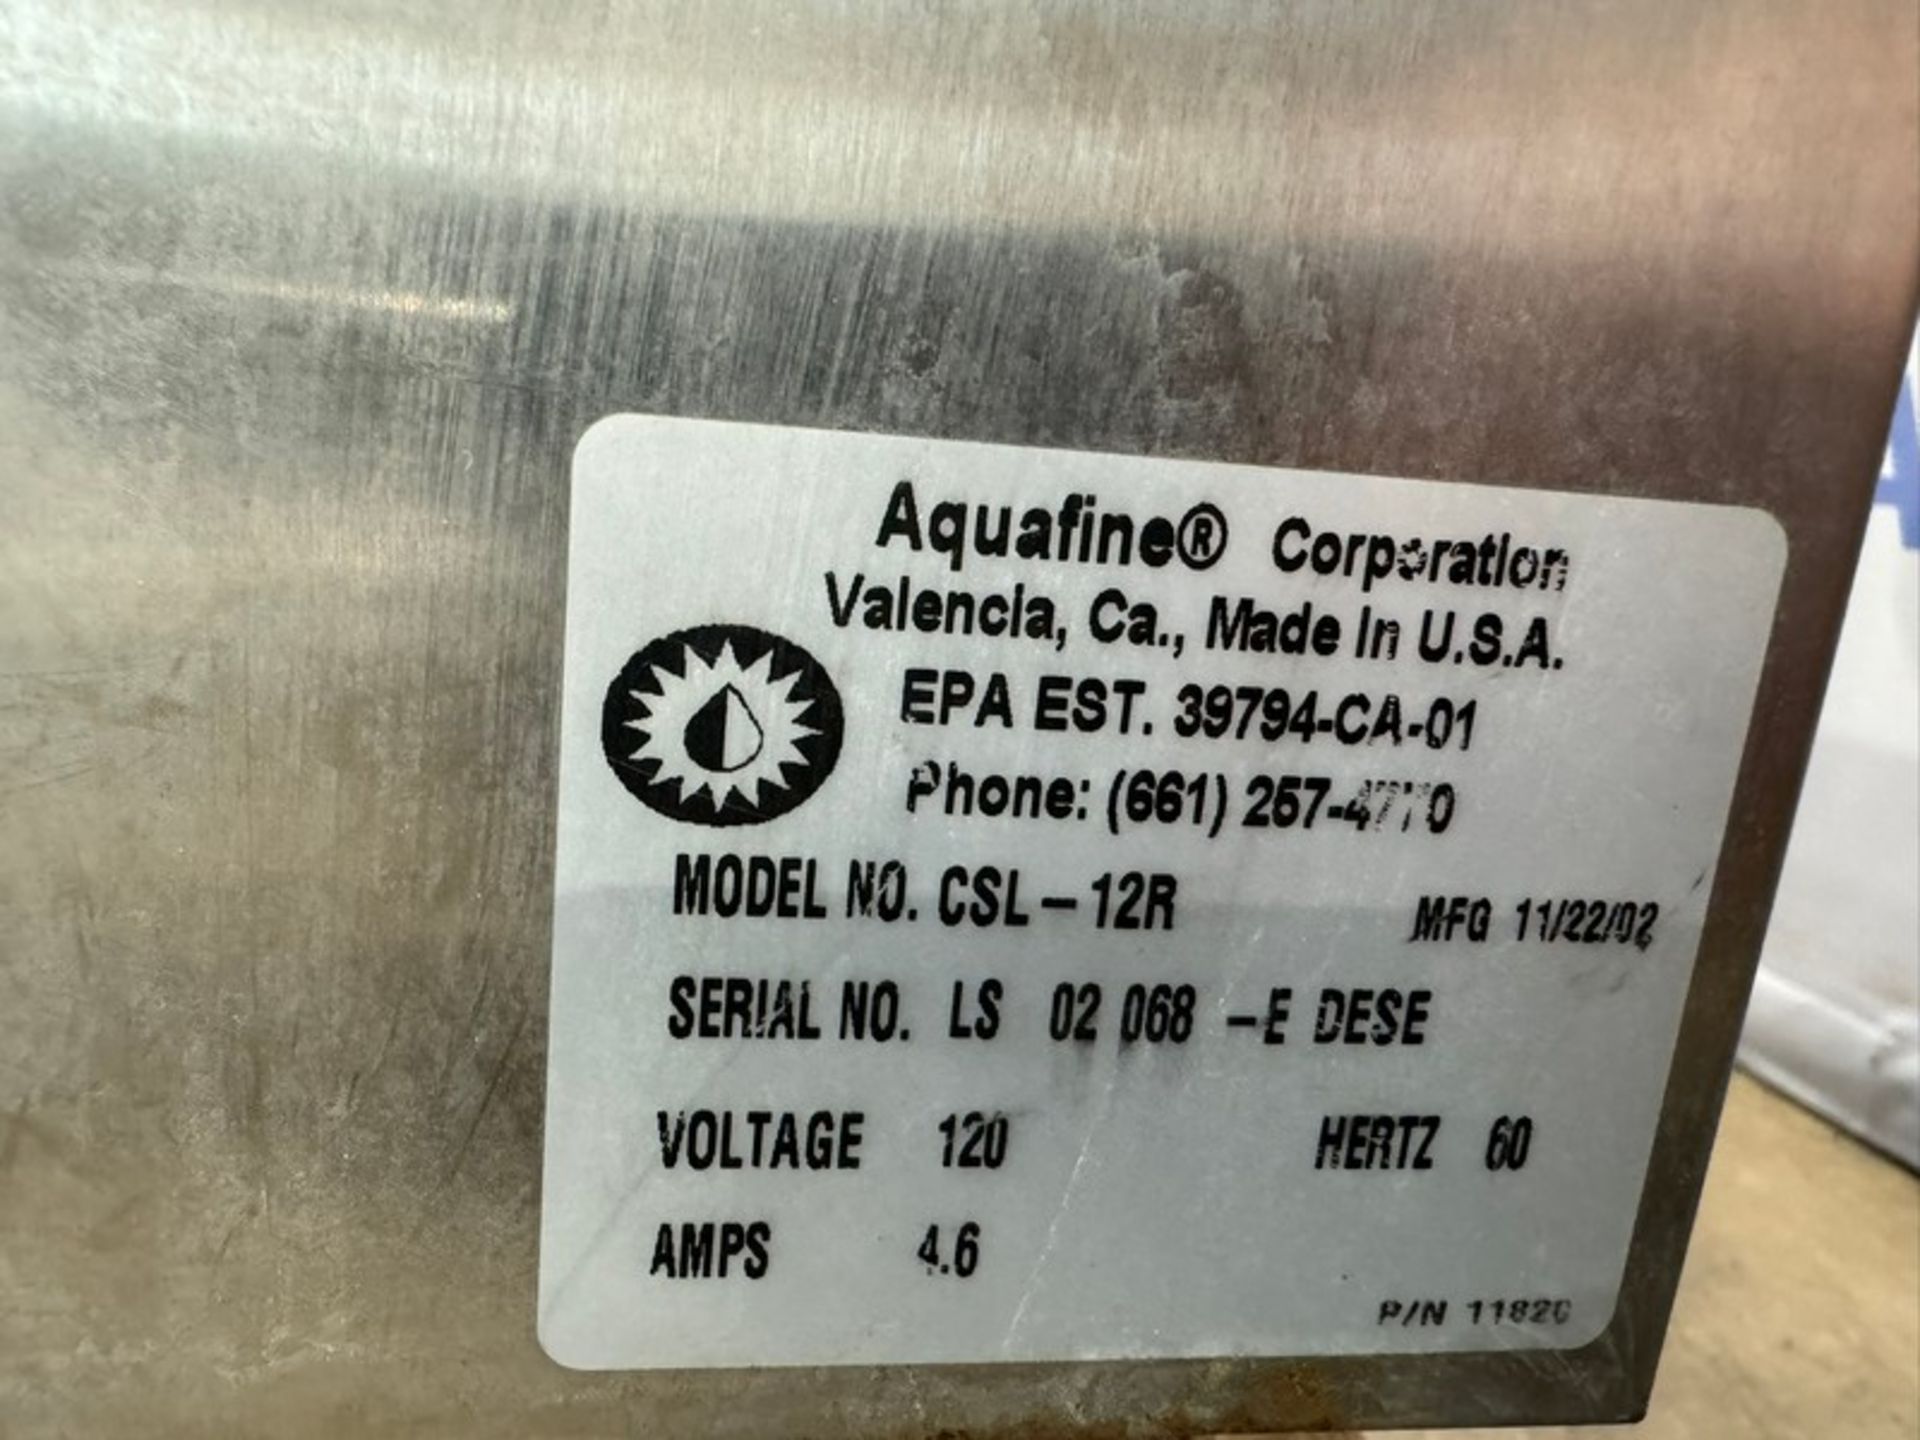 Aquafine S/S Ultraviolet Disinfection Unit, M/N CSL-8R, 120 Volts, with Aprox. 3" Clamp Type Inlet/ - Image 6 of 6